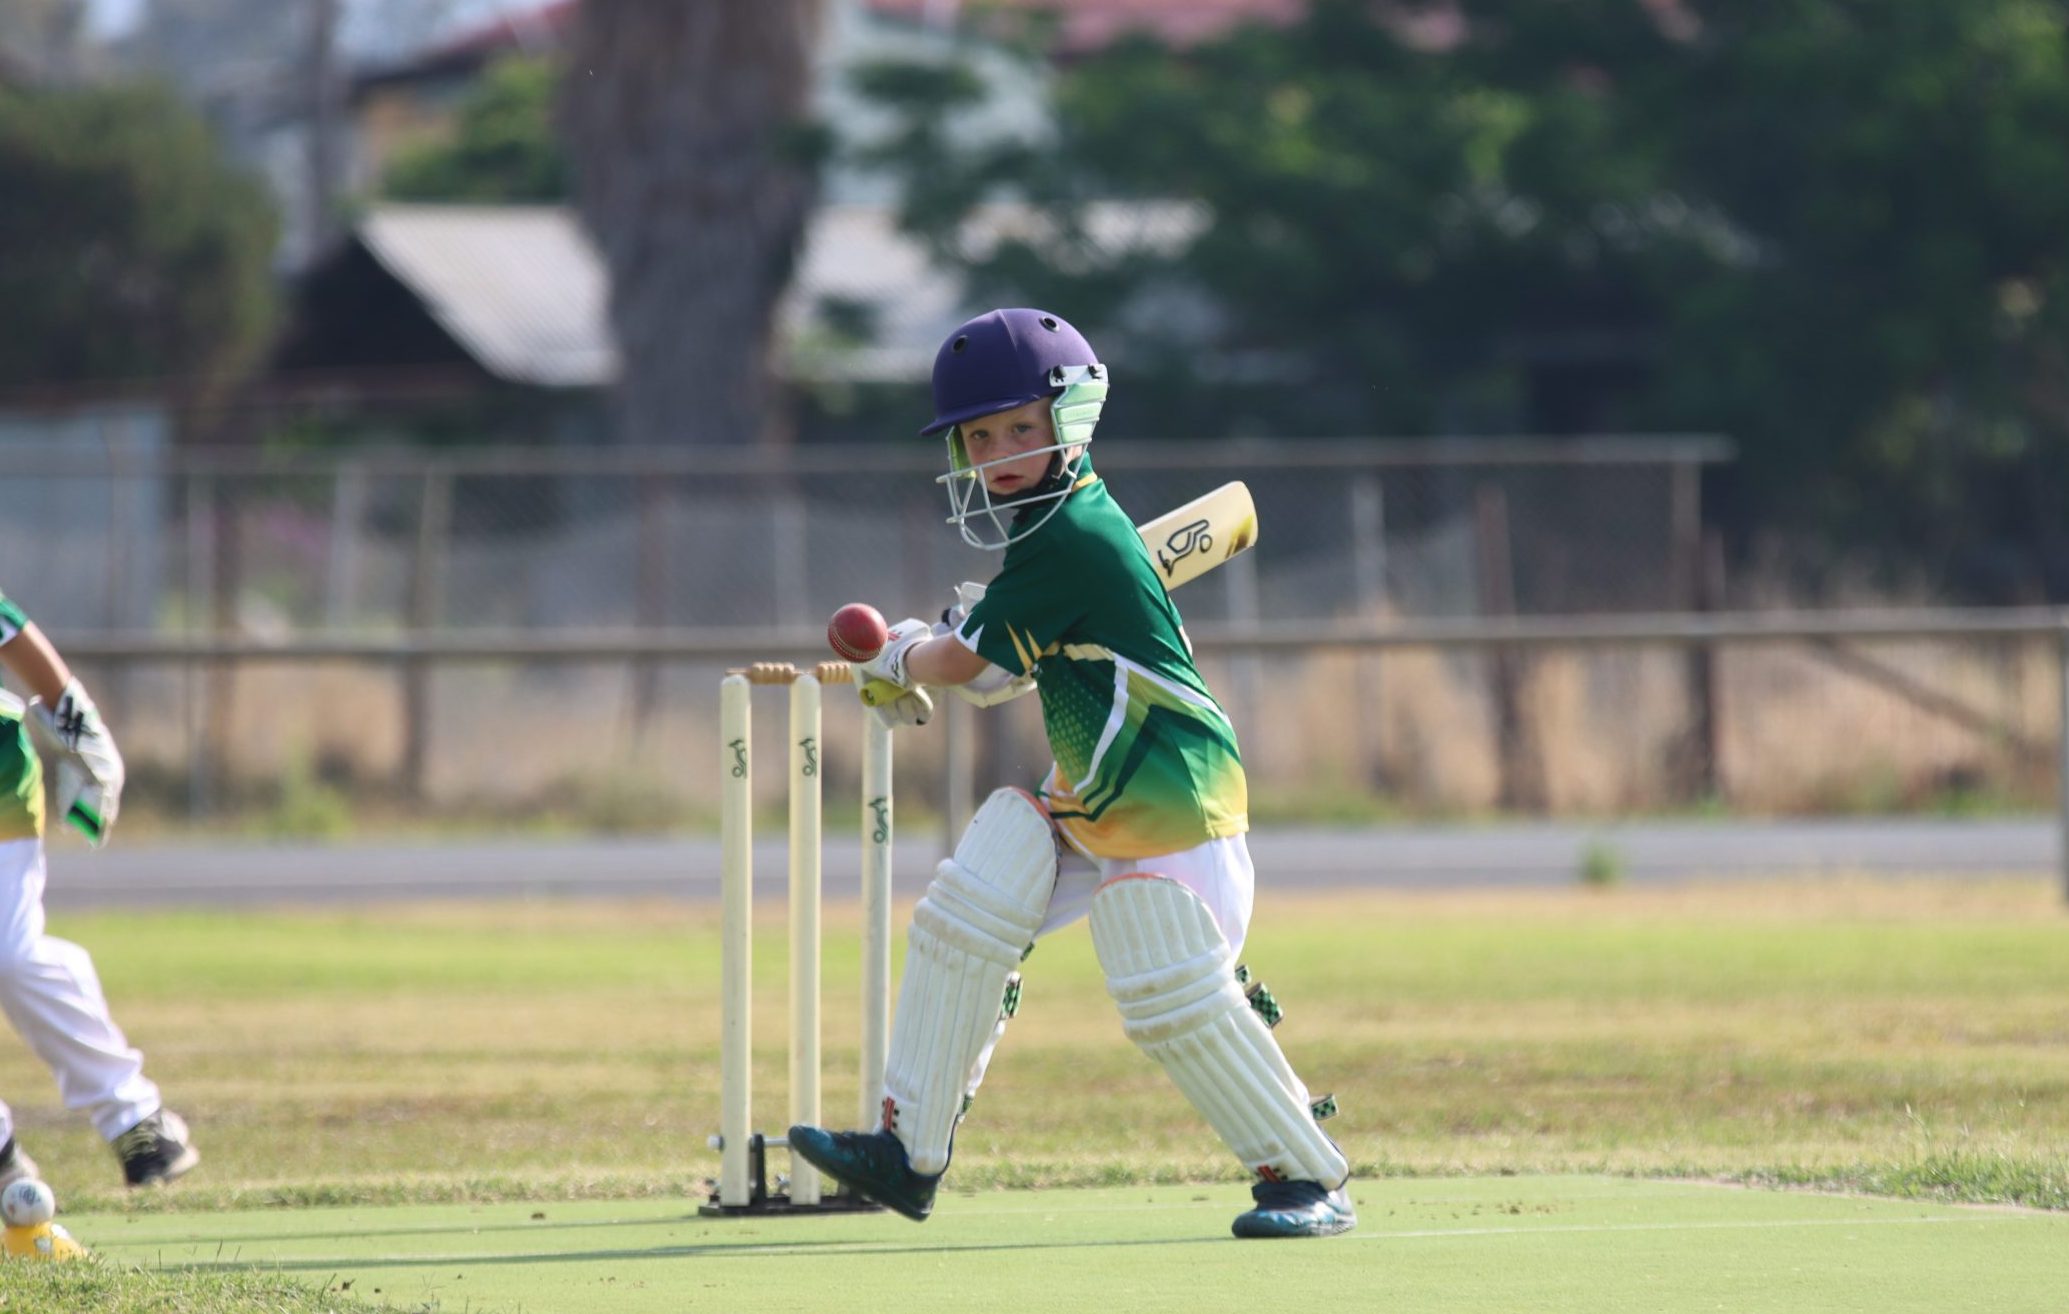 Junior cricketers glove up for new season | GALLERY